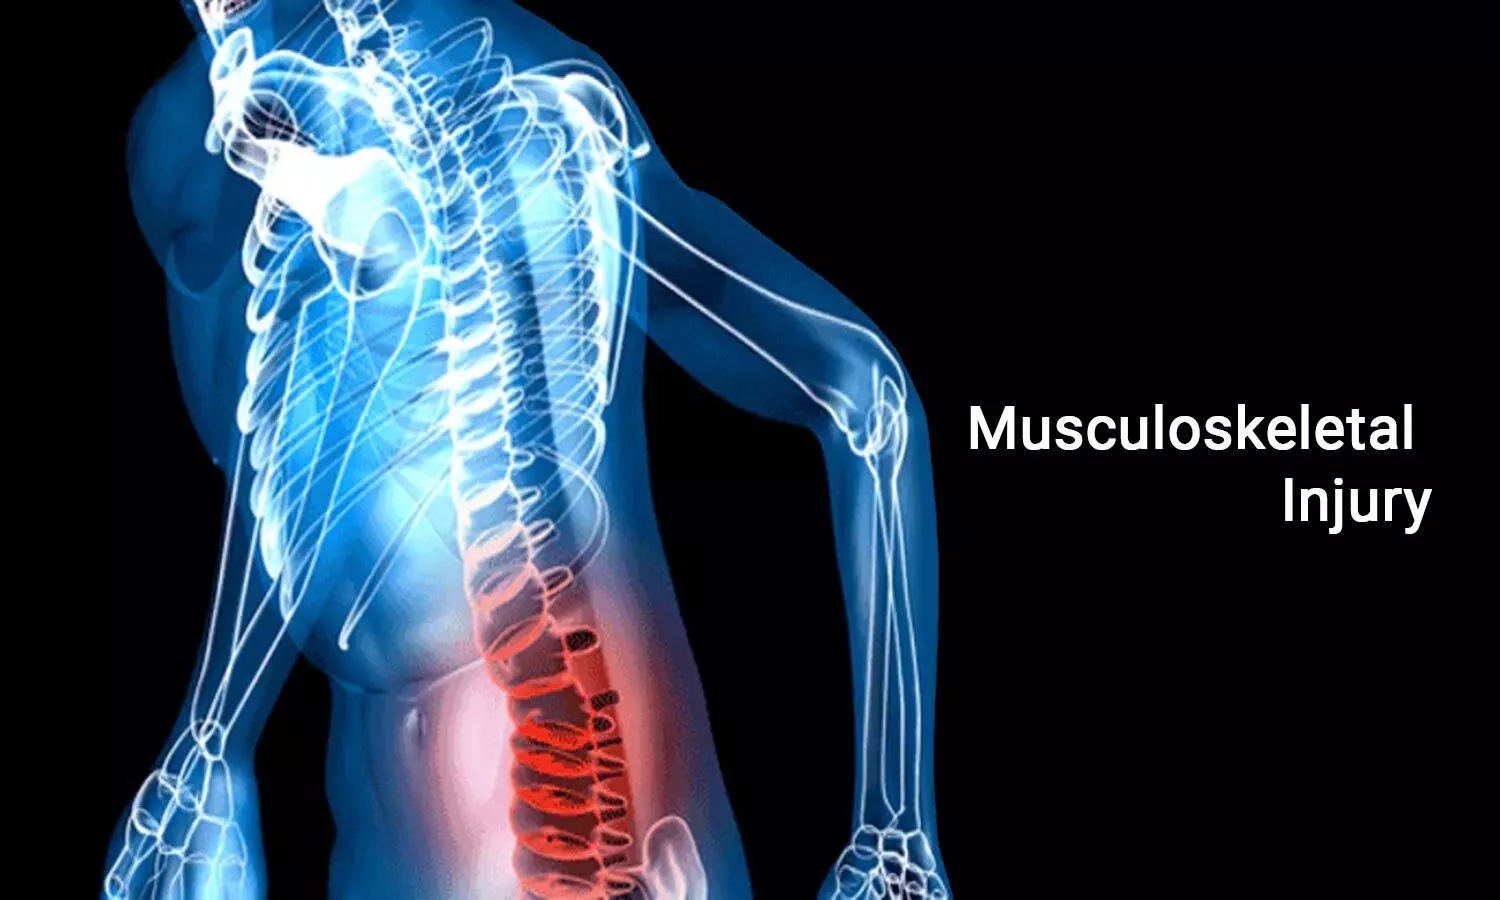 Musculoskeletal diagnosis can be improved with 3D imaging